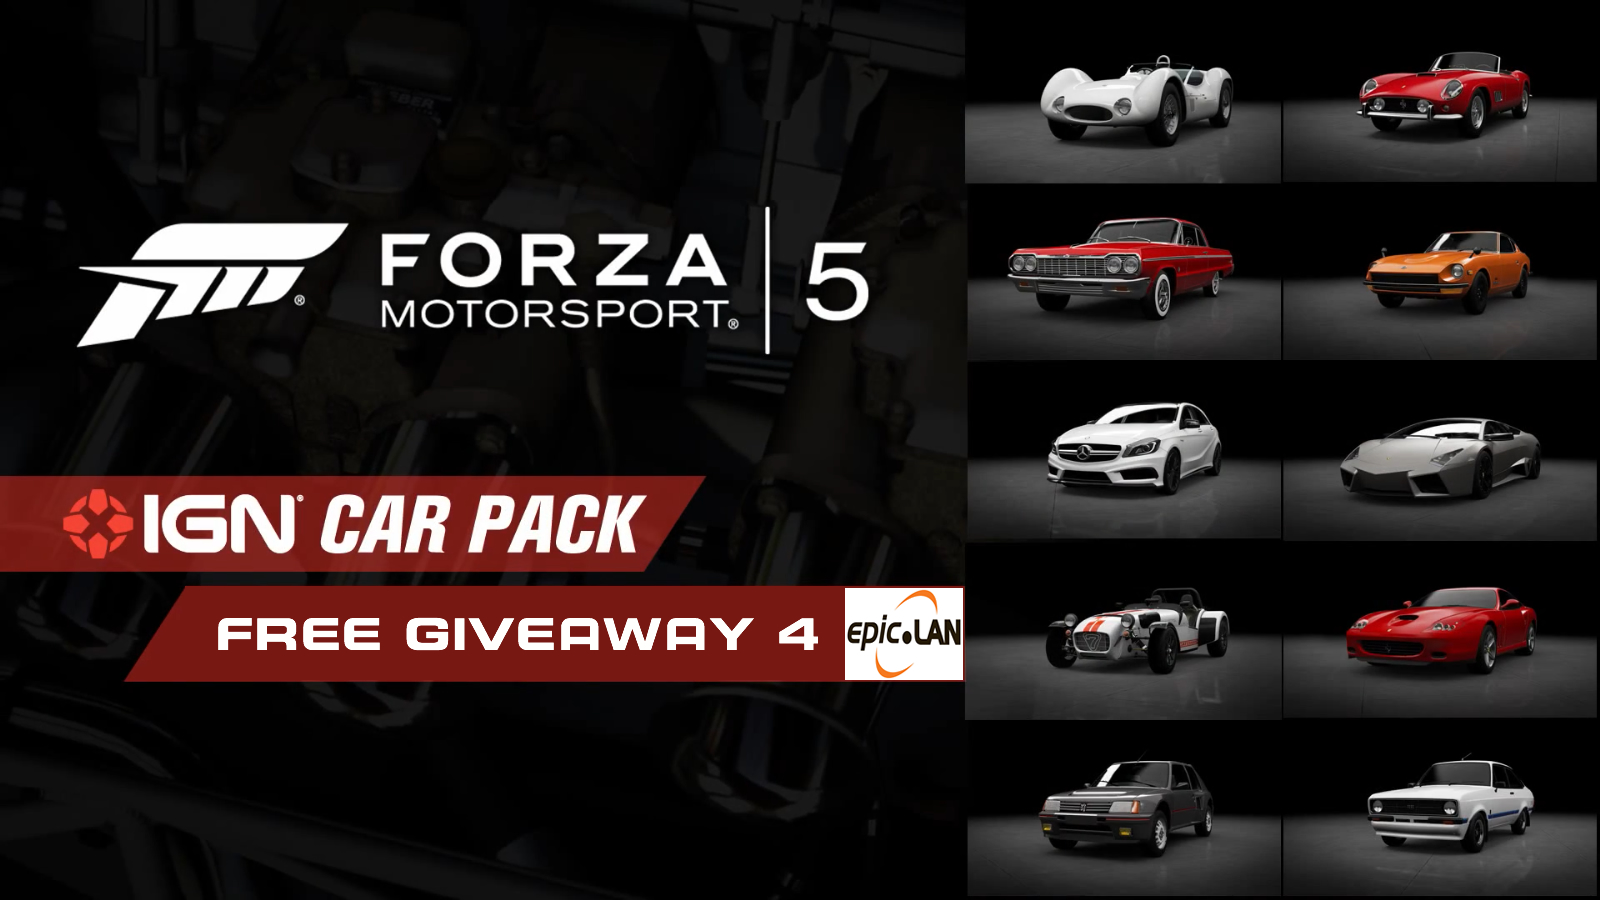 Win yourself 1 of 5 Forza Motorsport 5 IGN Car Packs